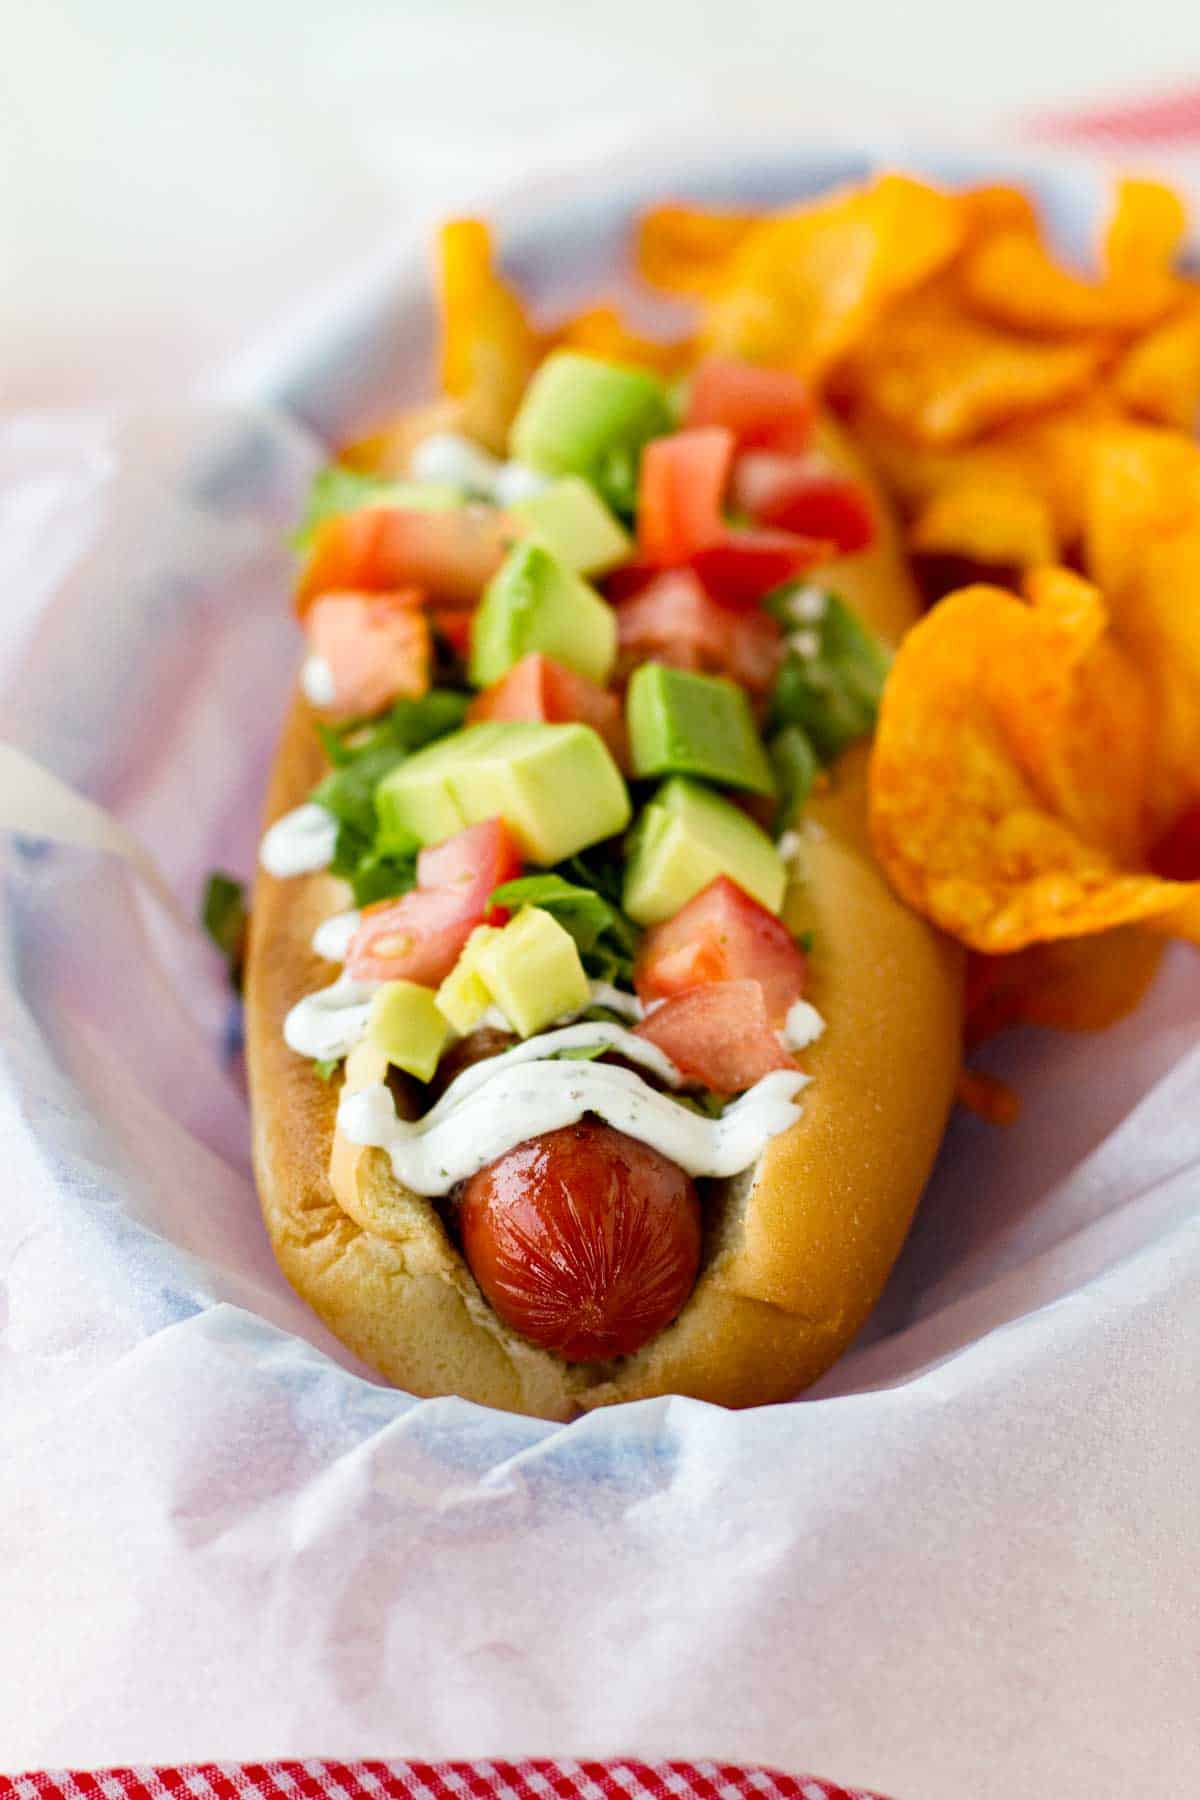 Hot dog topped with bacon, lettuce, avocado, and tomato.